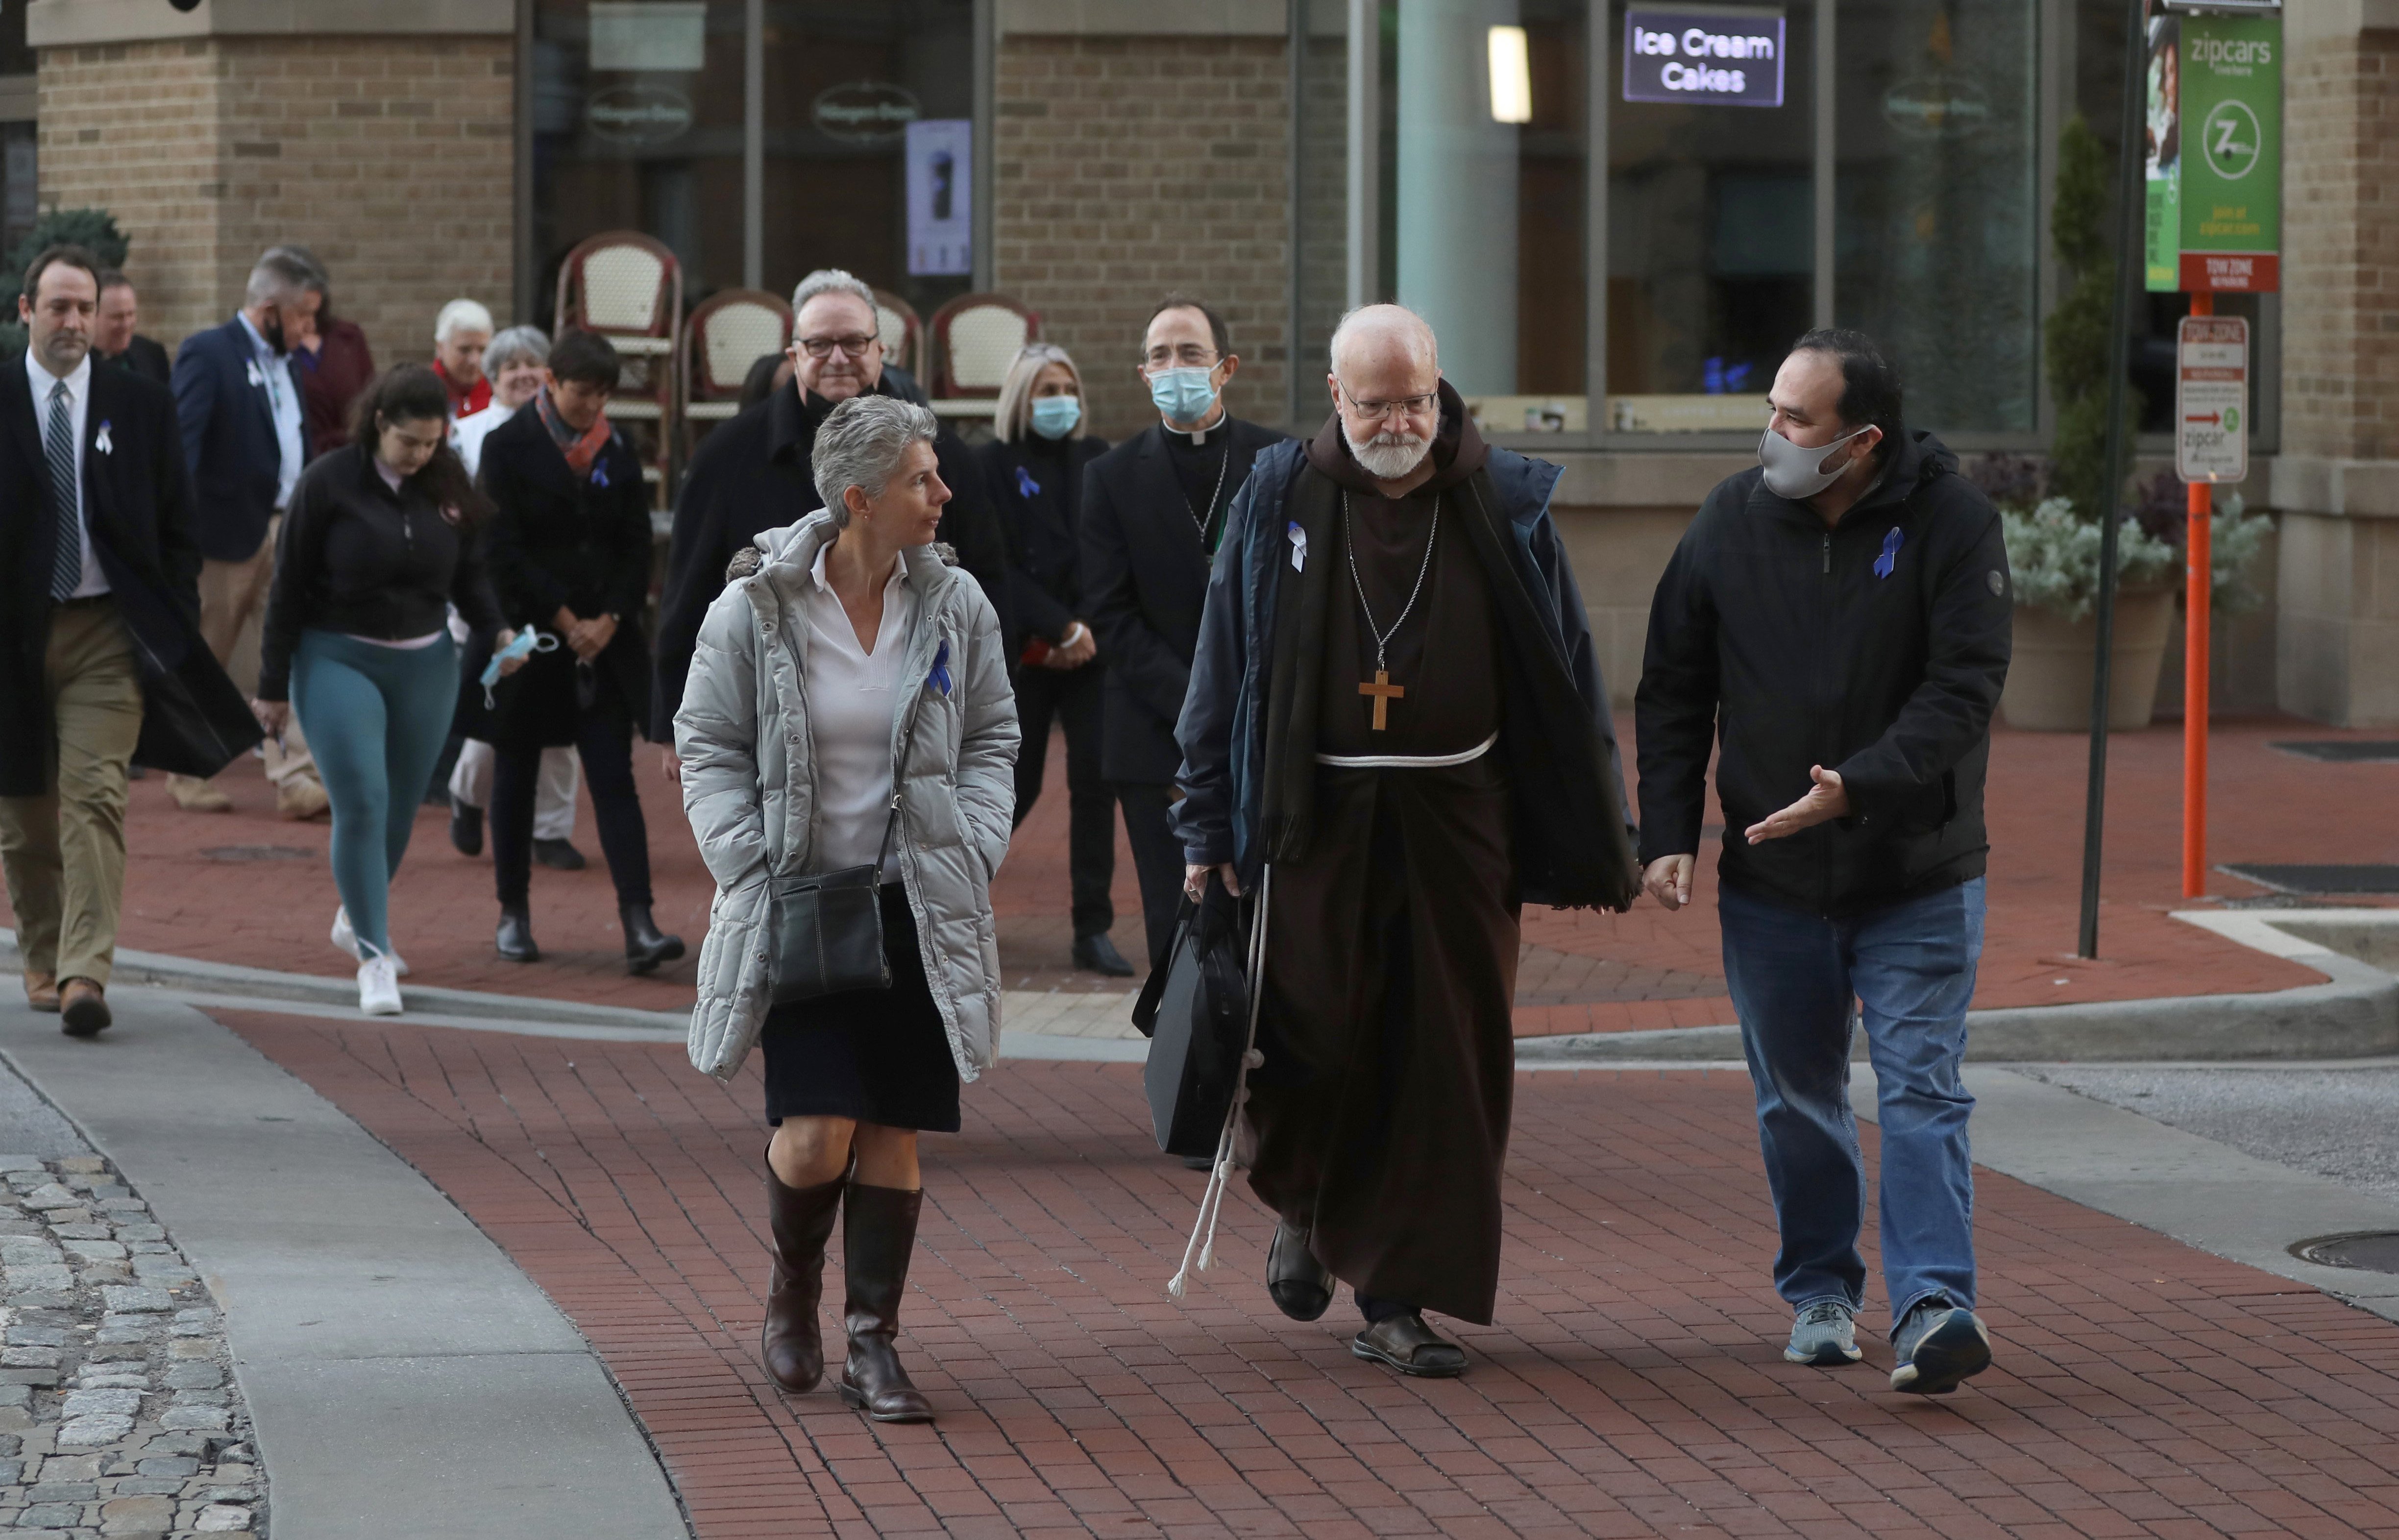 Cardinal Sean P. O'Malley of Boston, president of the Pontifical Commission for the Protection of Minors, leads a sunrise walk to end abuse, in Baltimore, Nov. 18, 2021. (CNS photo/Bob Roller)